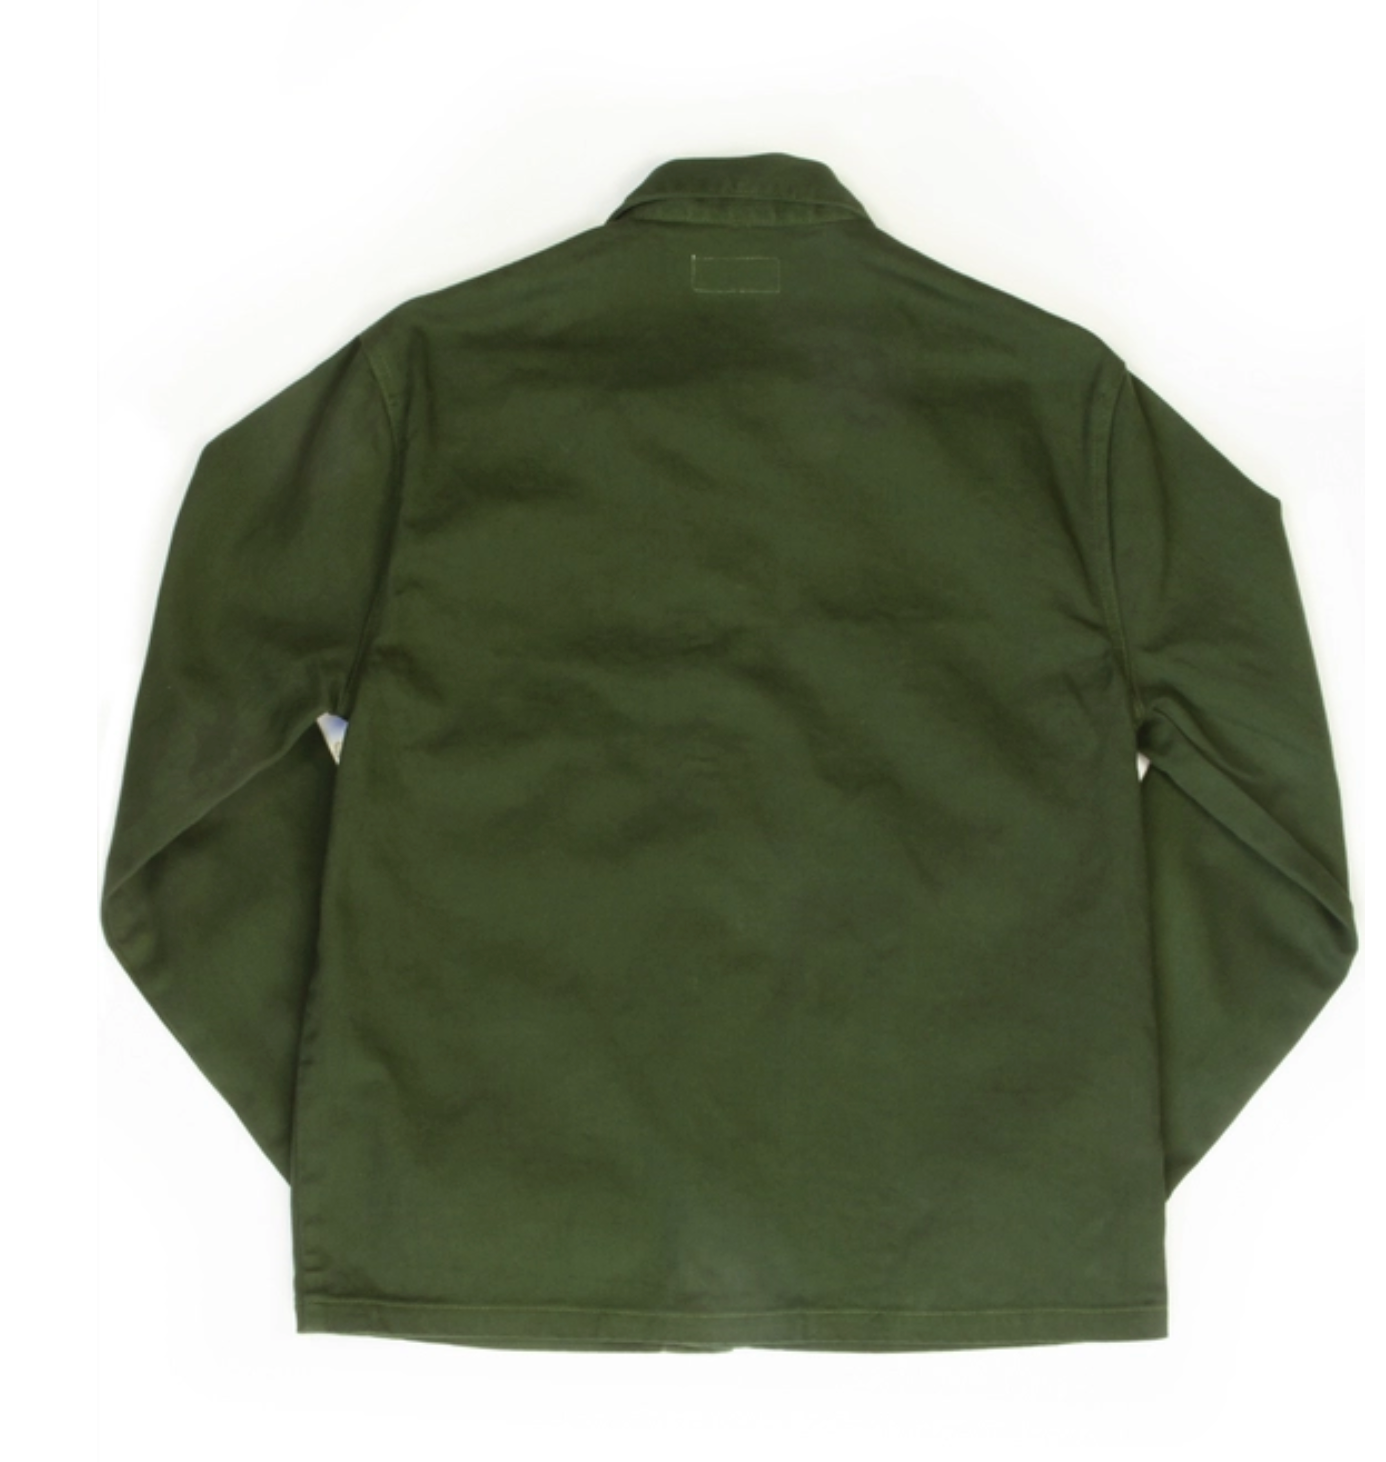 Garment Dyed Coverall Jacket - Green